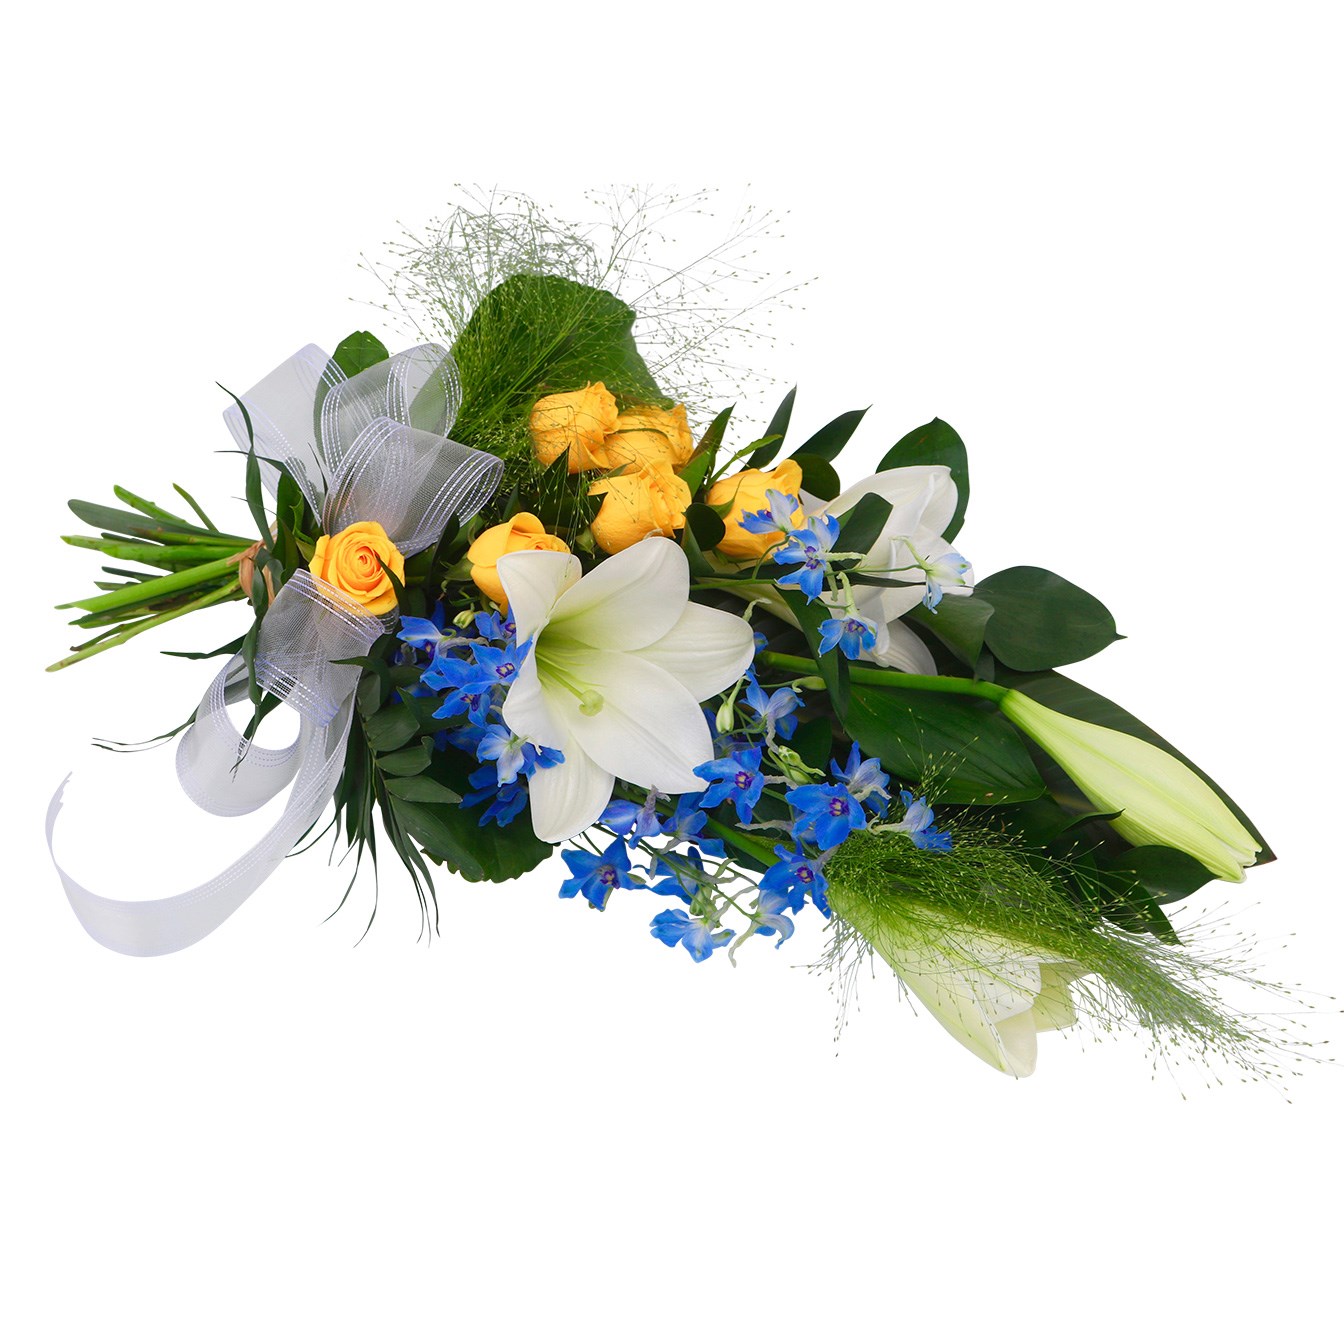 Silence has arrived -funeral bouquet